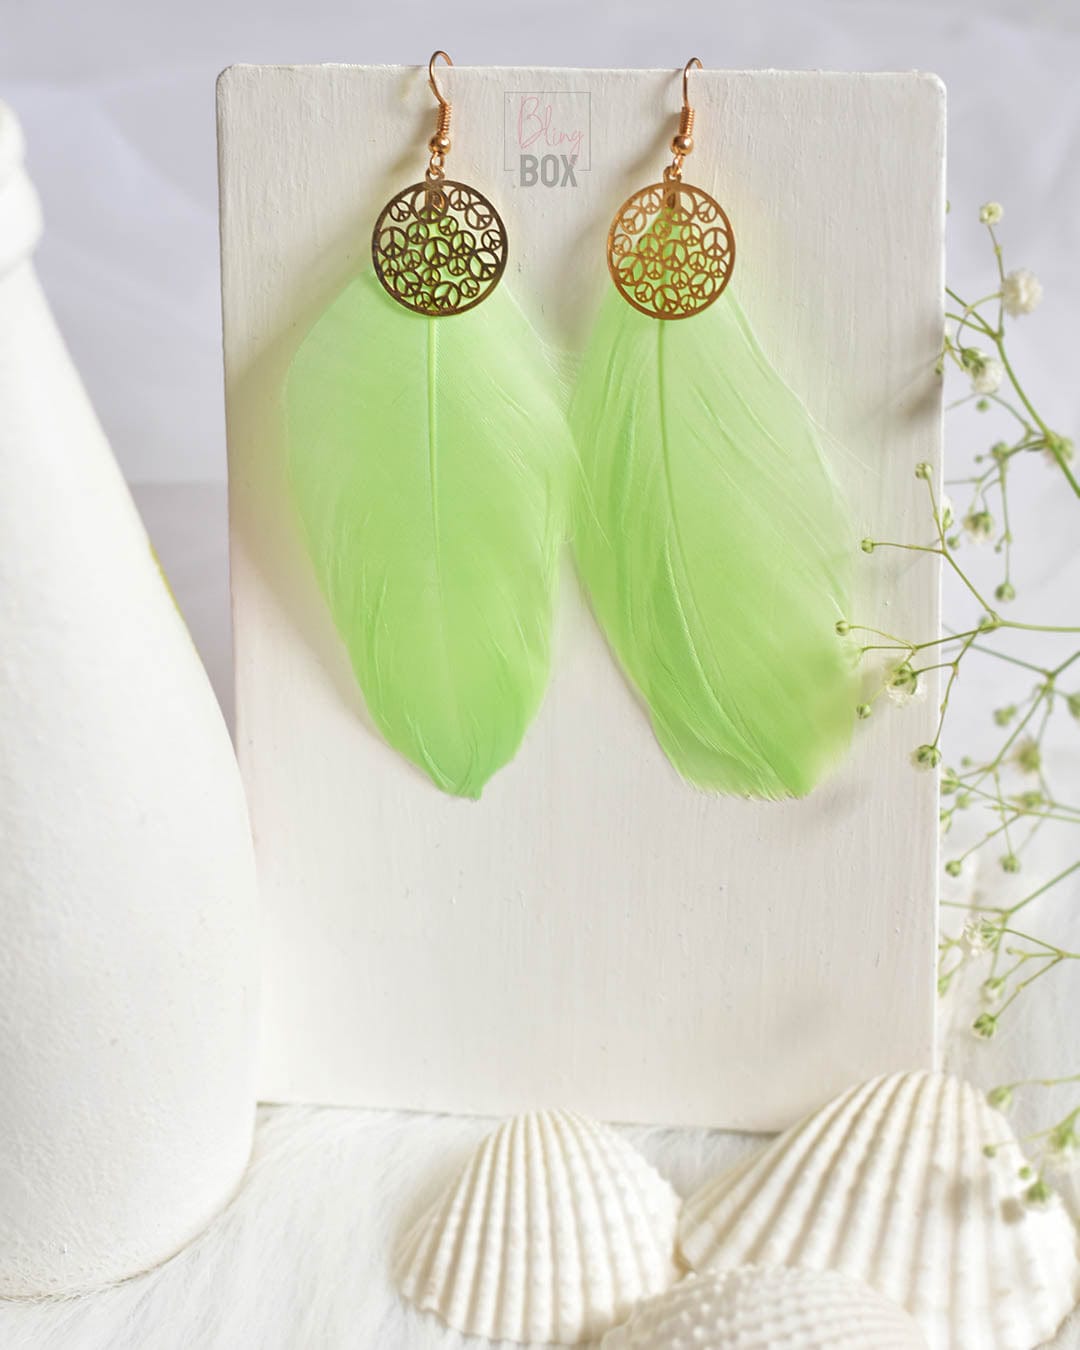 Bling Box Jewellery Gold Charm Feather earrings Jewellery 